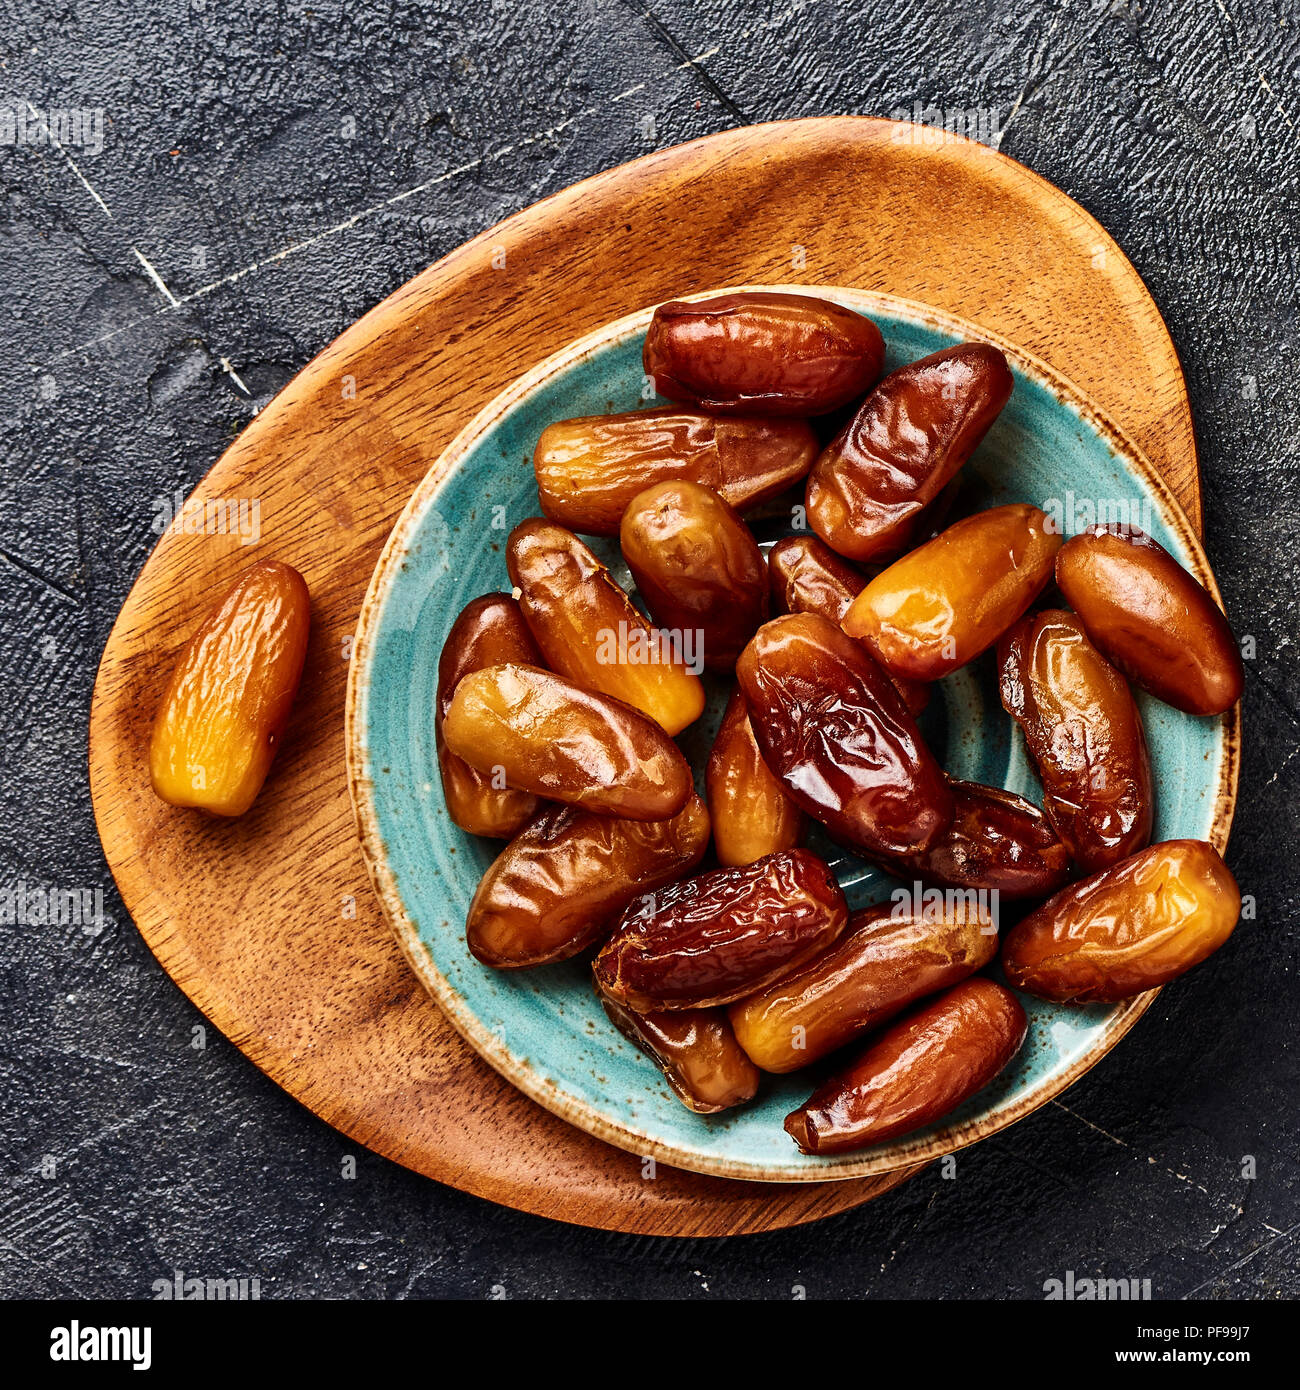 Dried dates fruits on plate. Top view of pitted dates. Stock Photo